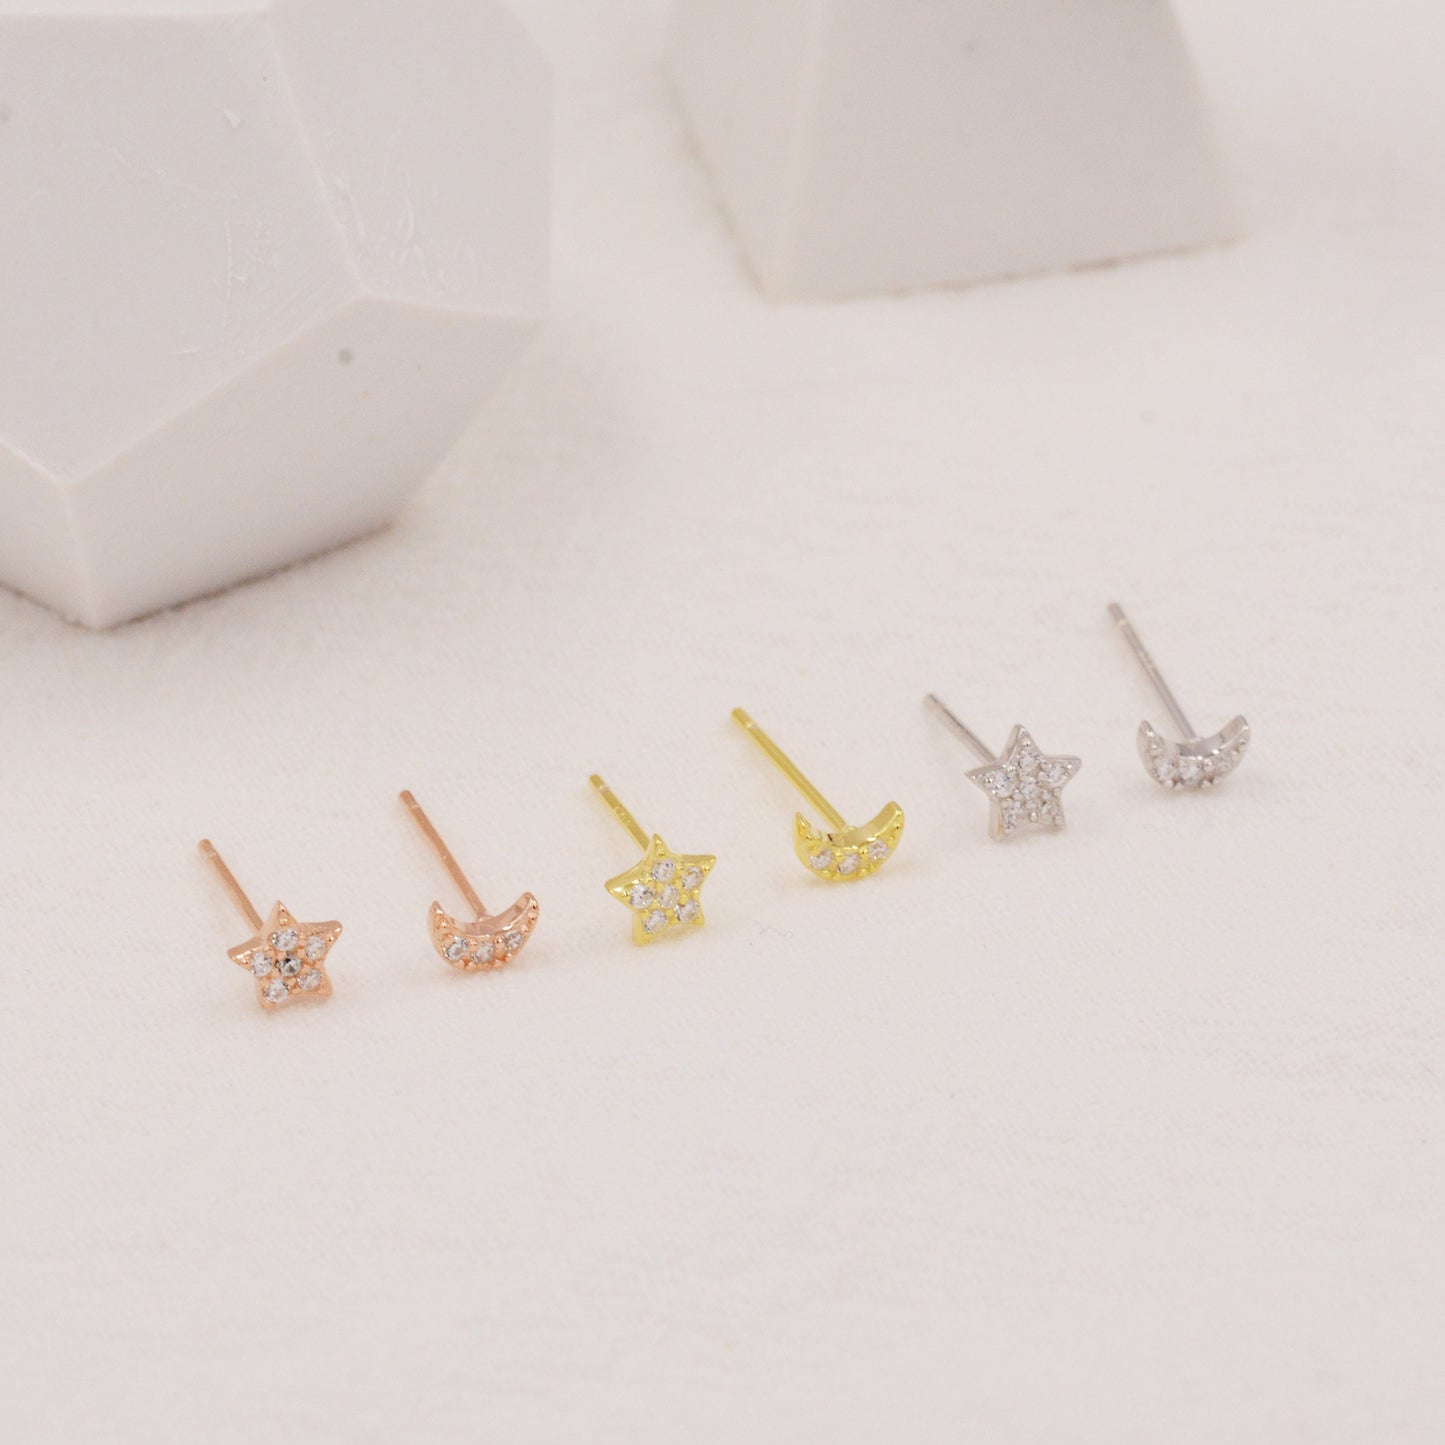 CZ Moon and Star Tiny Stud Earrings in Sterling Silver, Silver or Gold, Asymmetric Stacking Earrings, Small Crystal Stud, Celestial Earrings